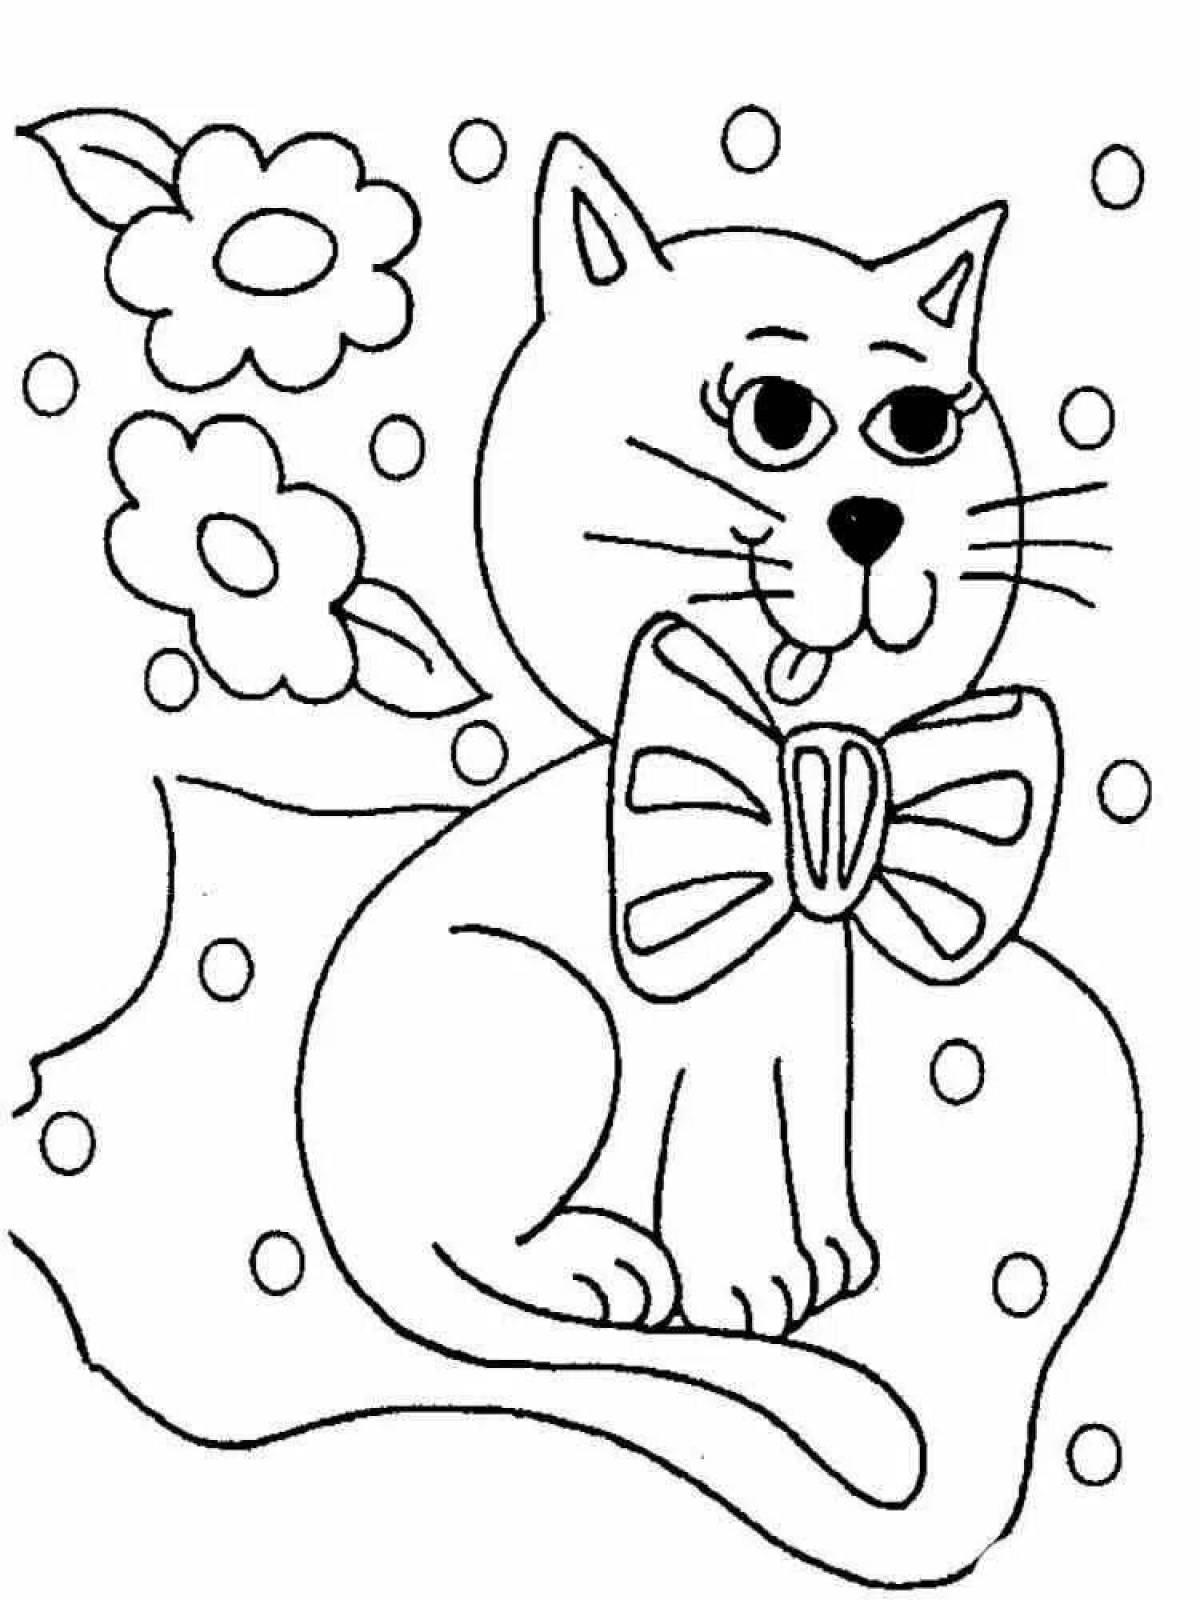 Fancy kitten coloring book for kids 5-6 years old